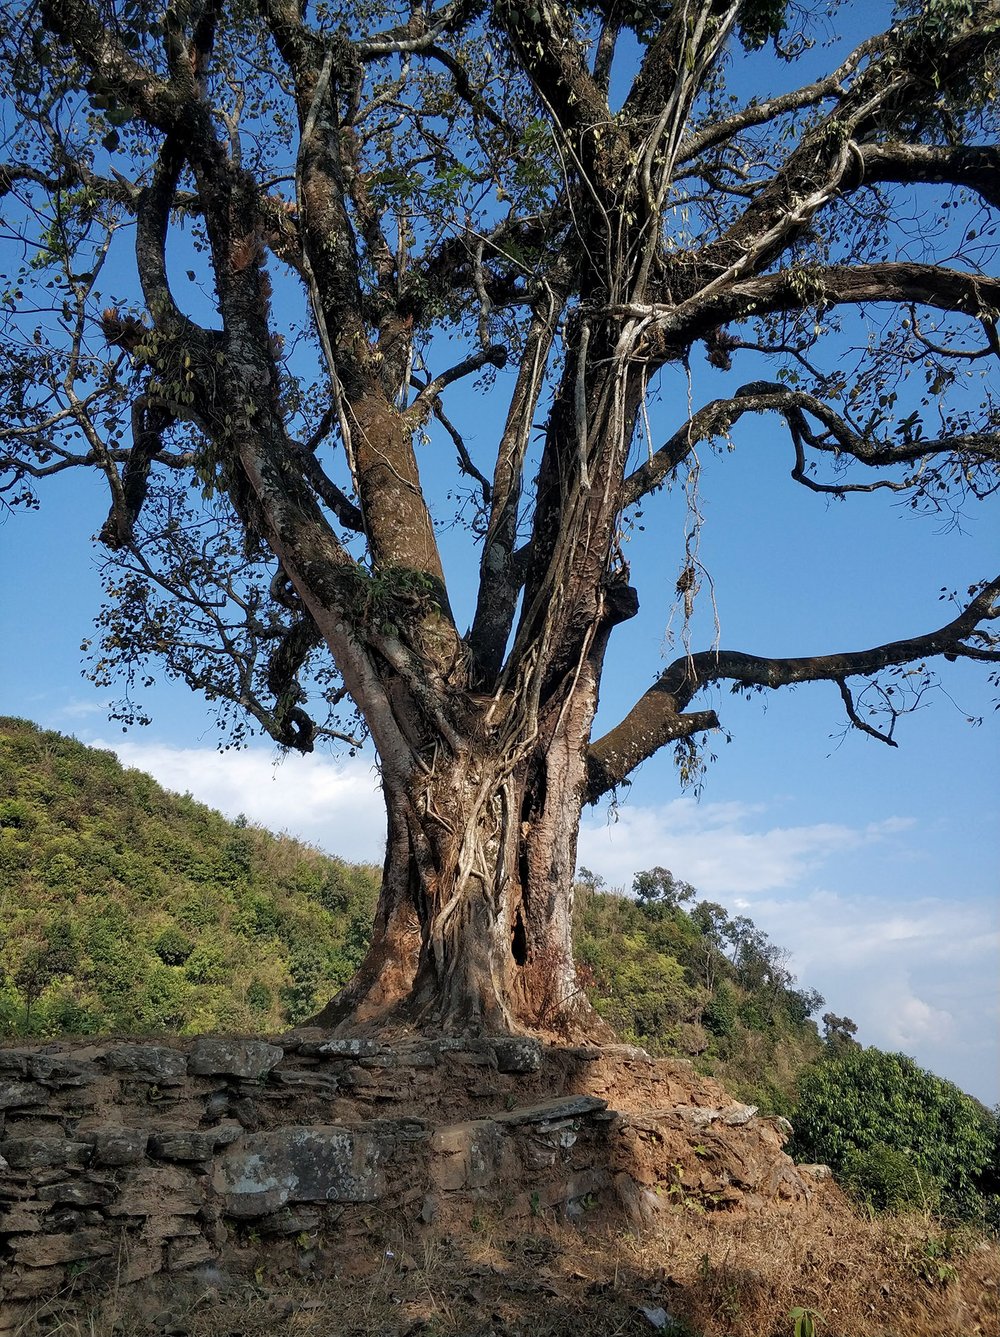  Another chautara, another impressive tree (getting close to the top now too) 